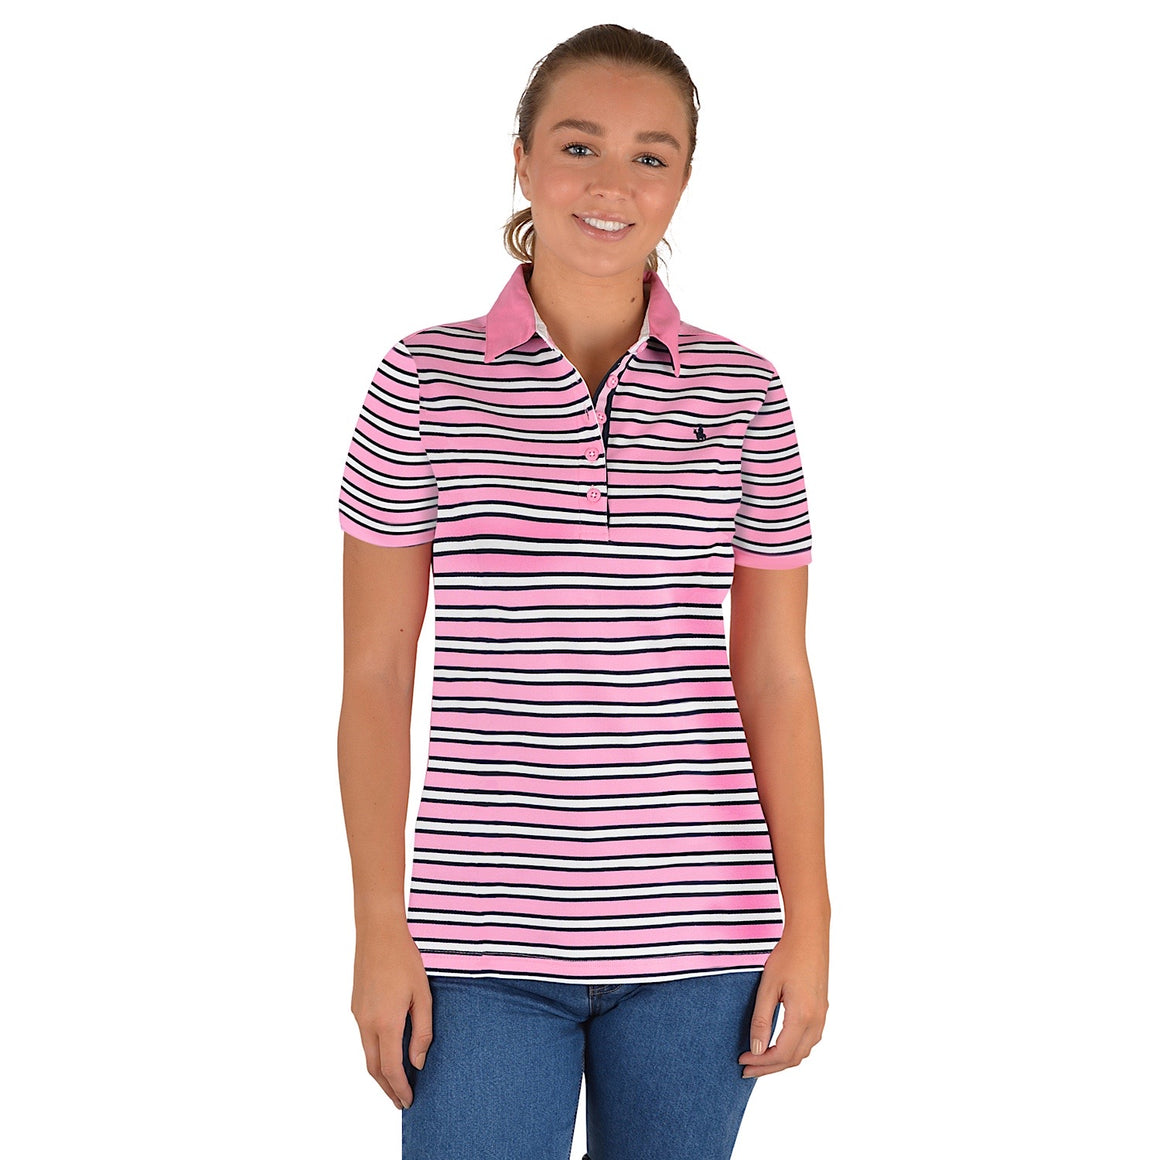 Buy Thomas Cook Womens Polos & T - Shirts - The Stable Door